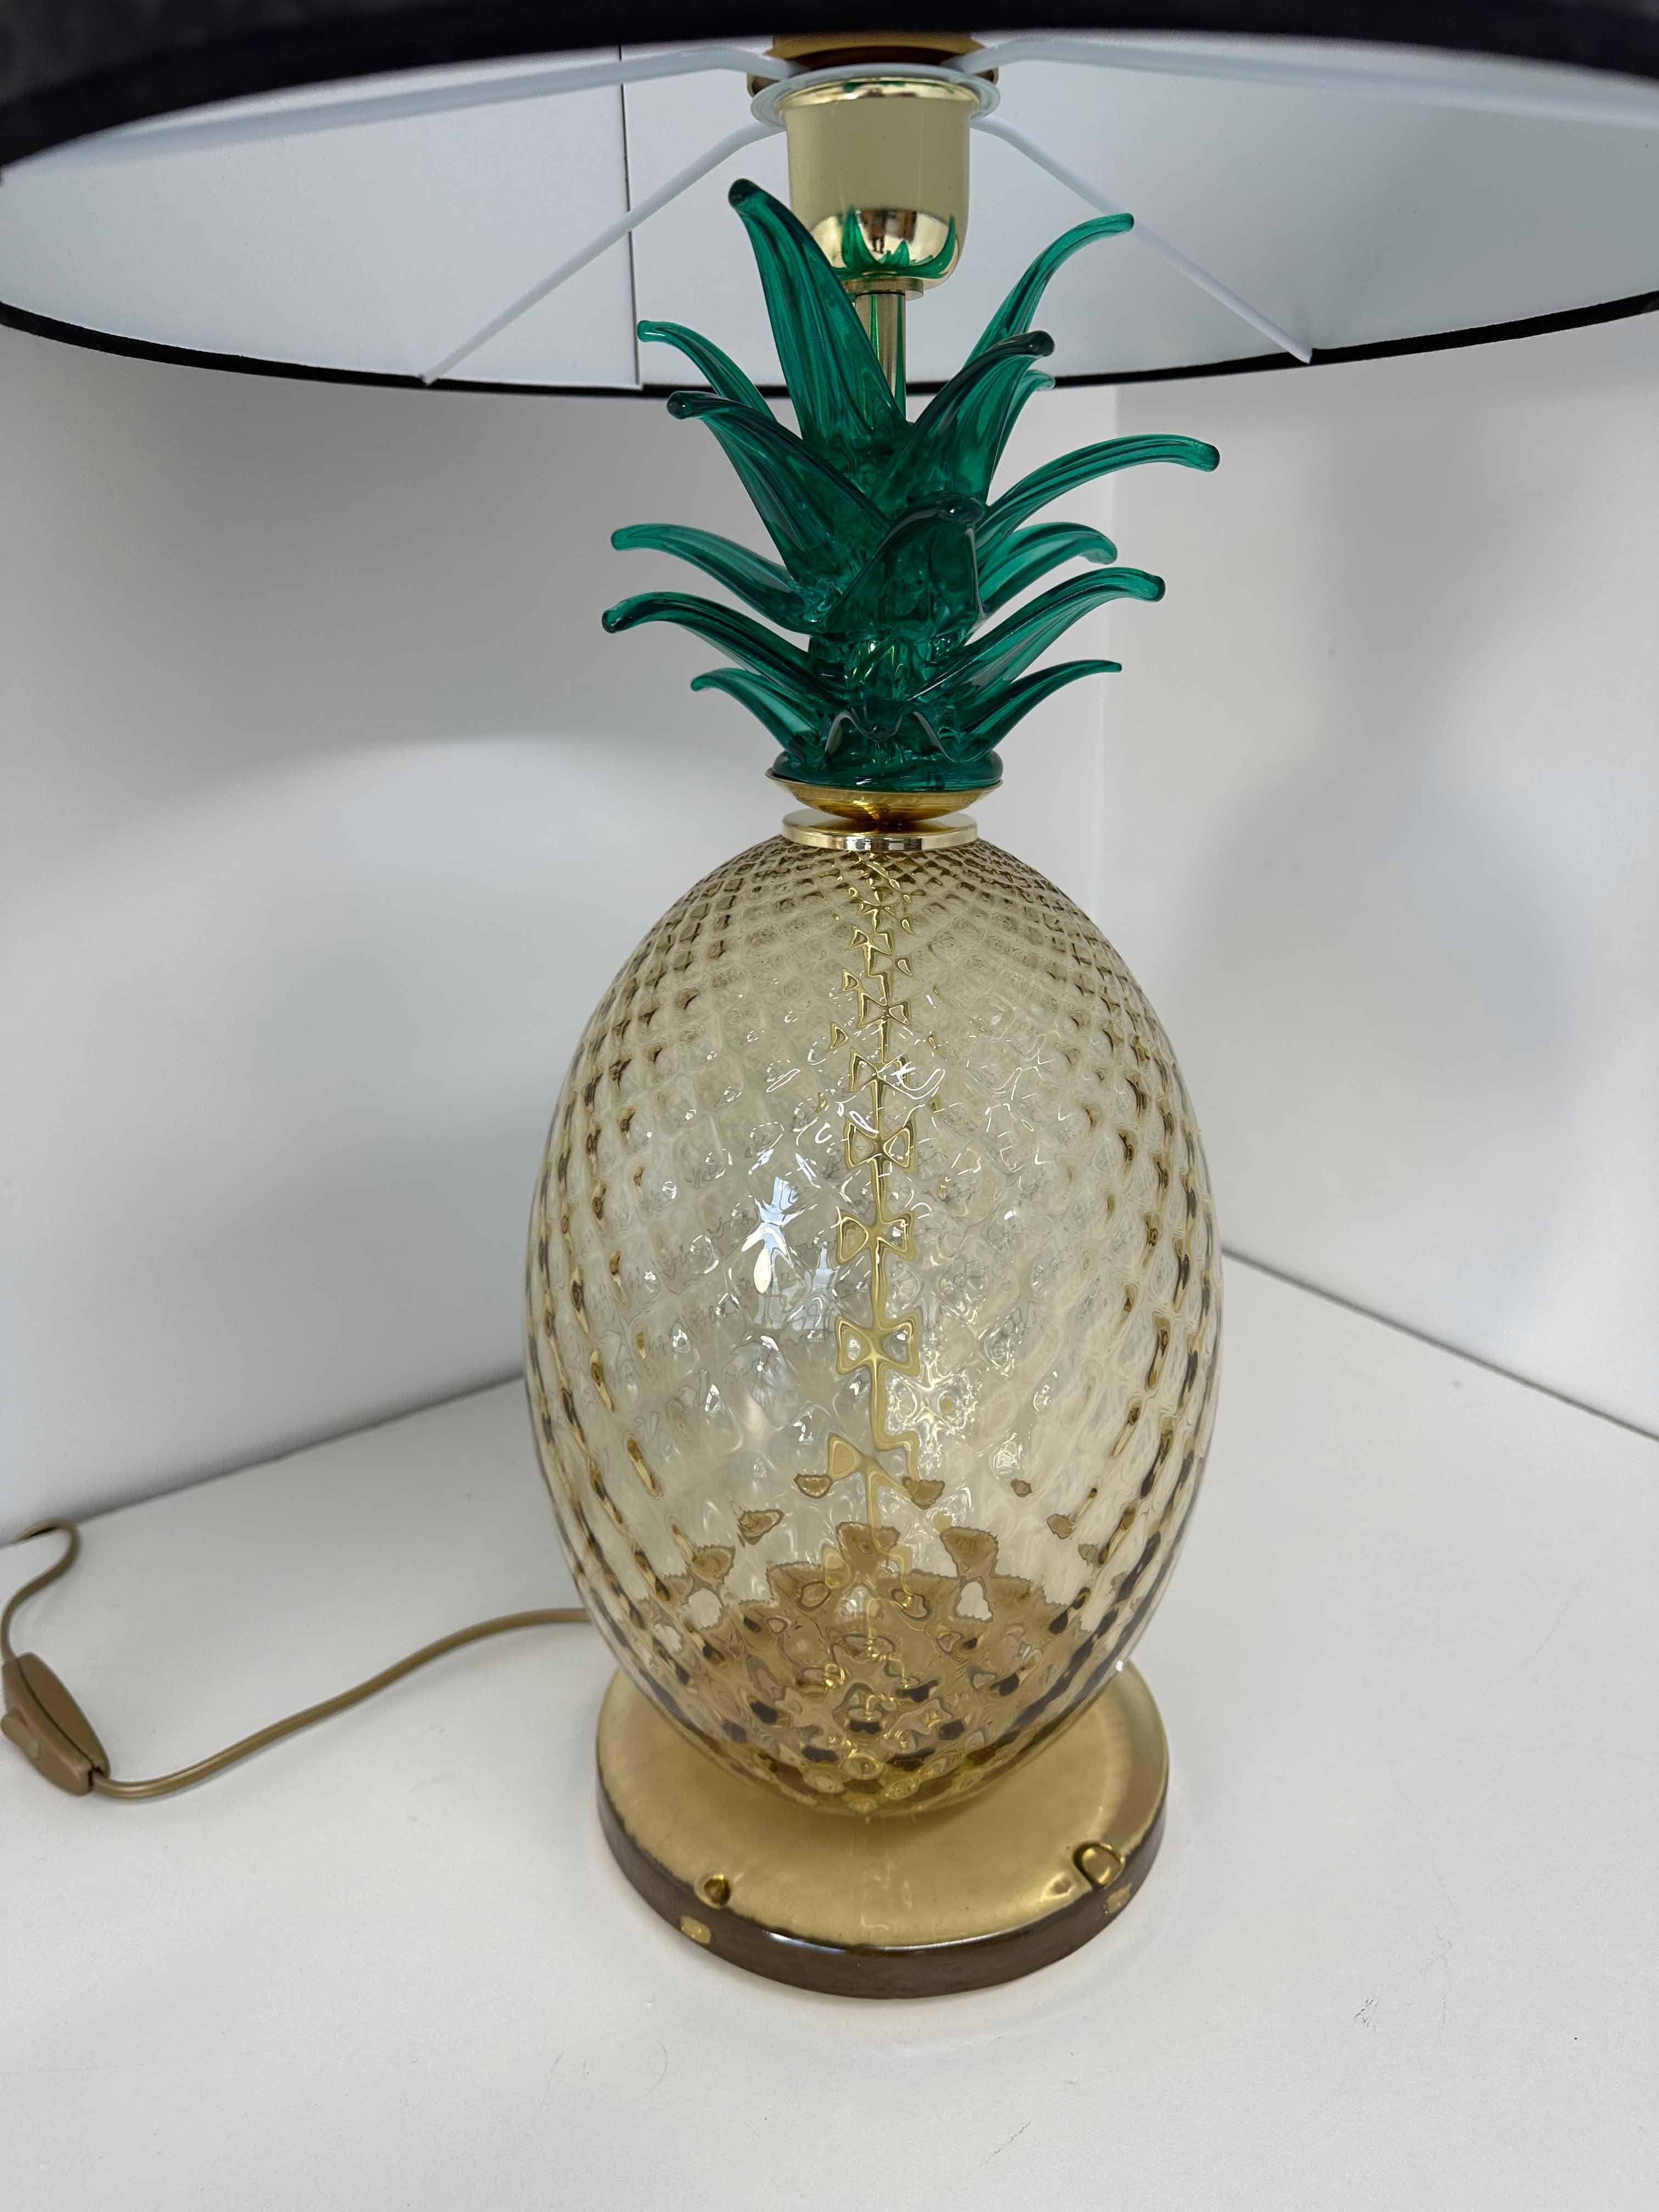 Pair of Italian Art Deco Pineapple Murano Glass Lamps with Lampshades  For Sale 7